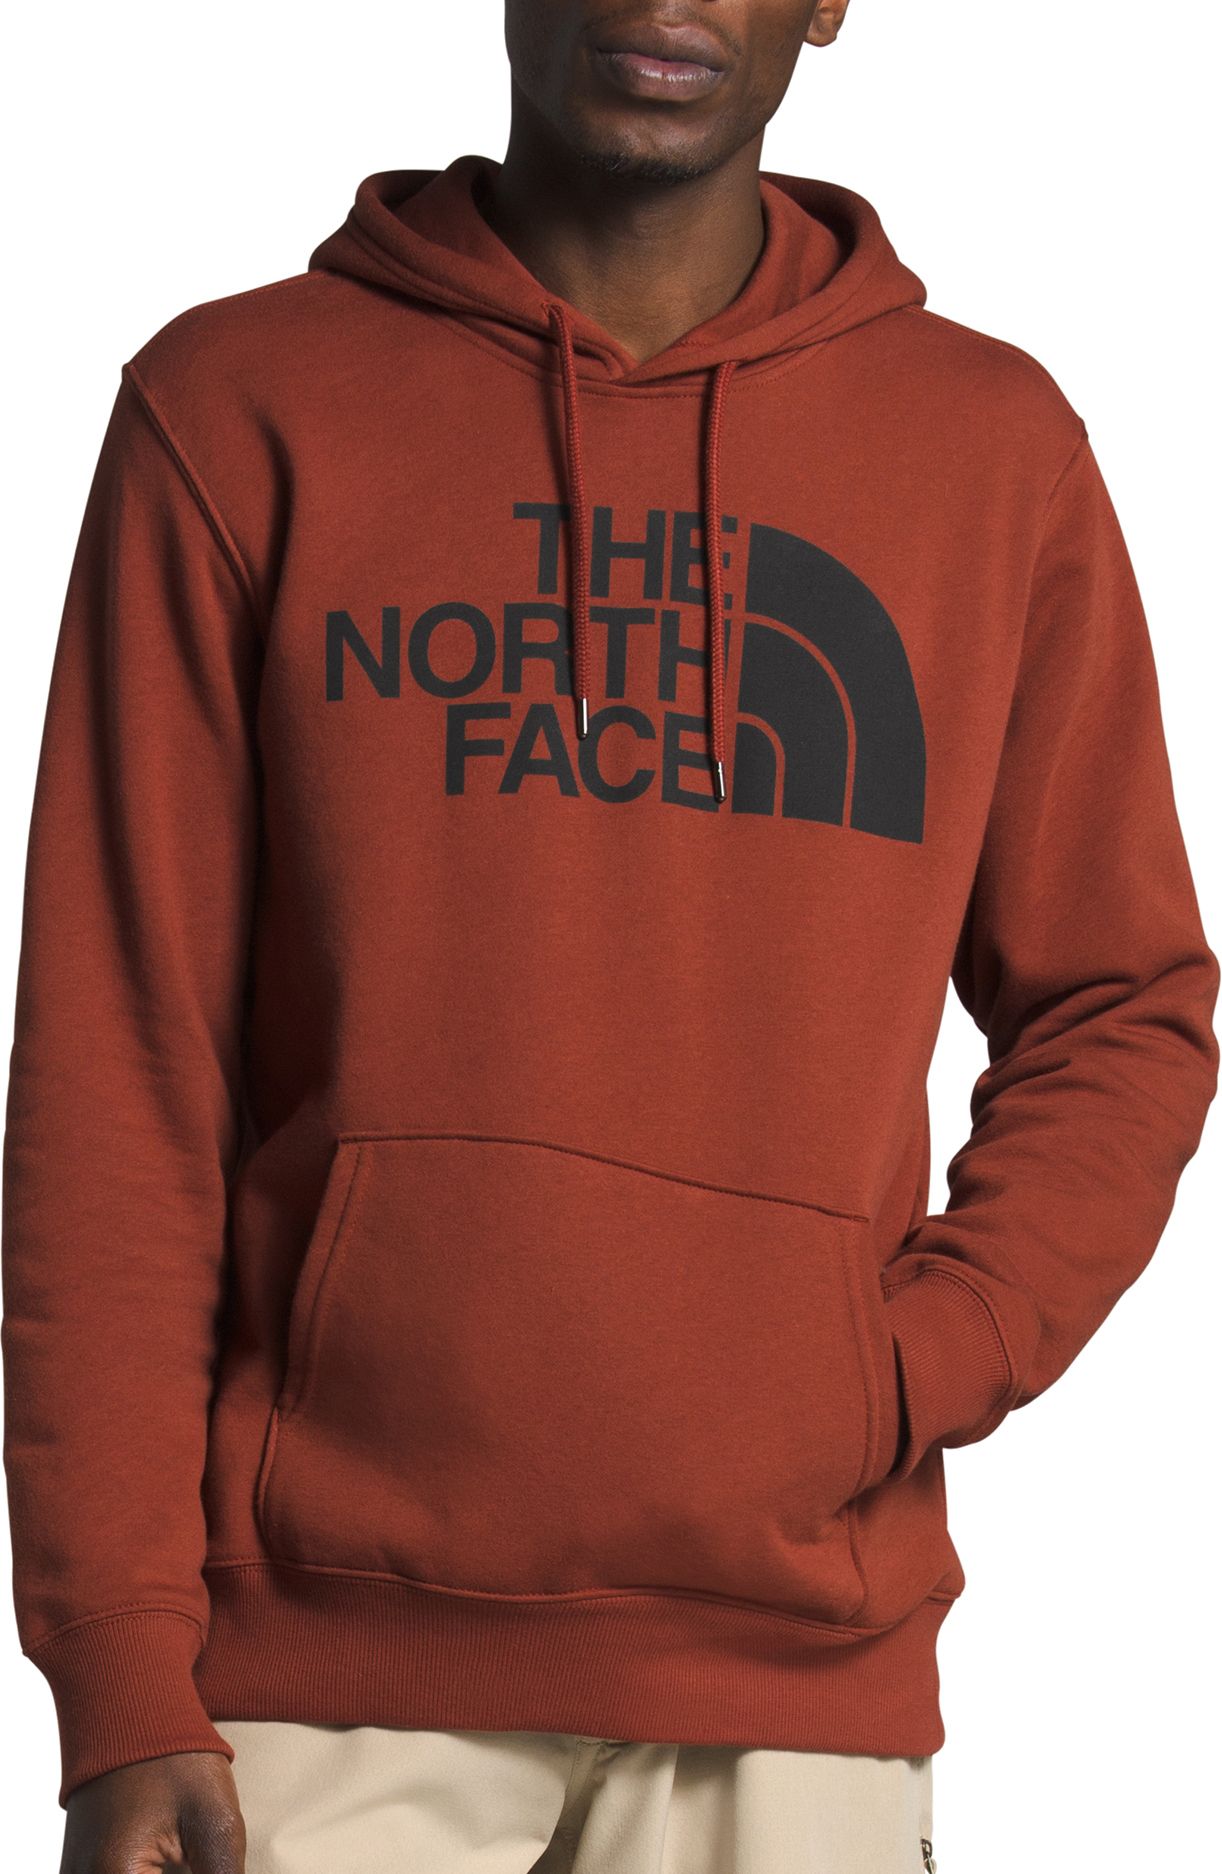 North Face Pullover Hoodies Deals, 70% OFF | www.gasabo.net